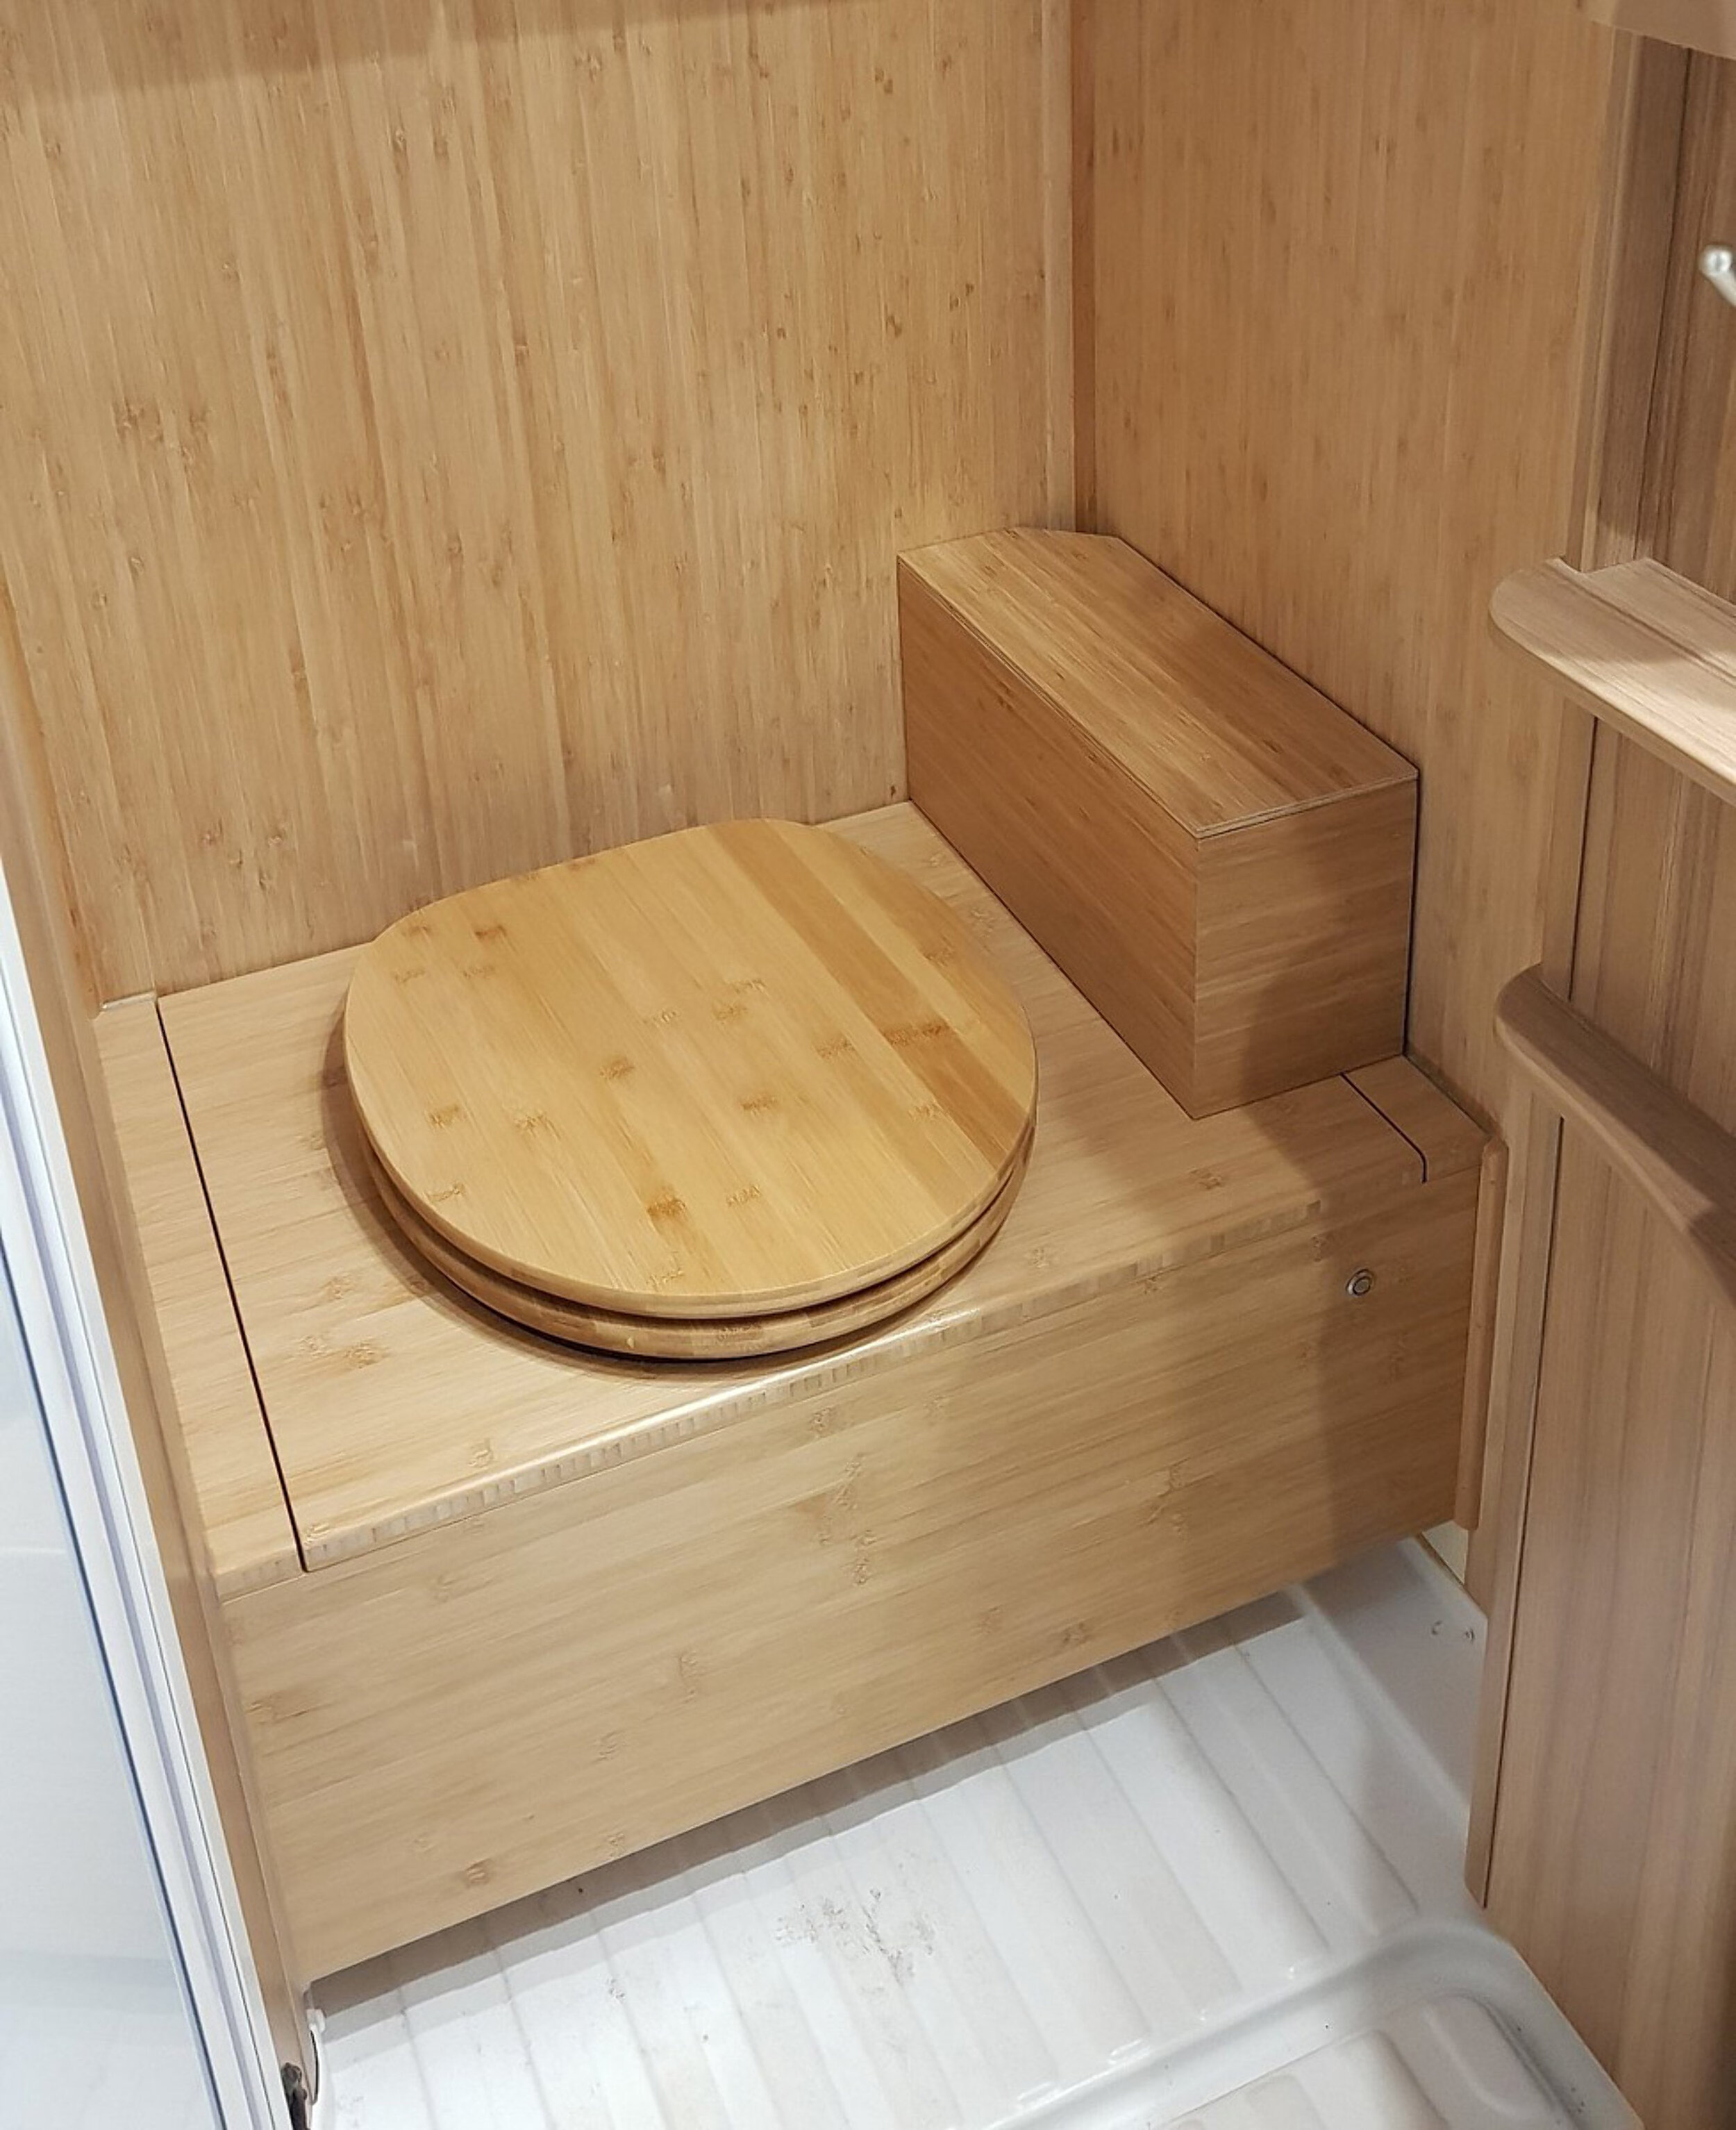 Our bamboo toilet seat completes your built-in camping toilet